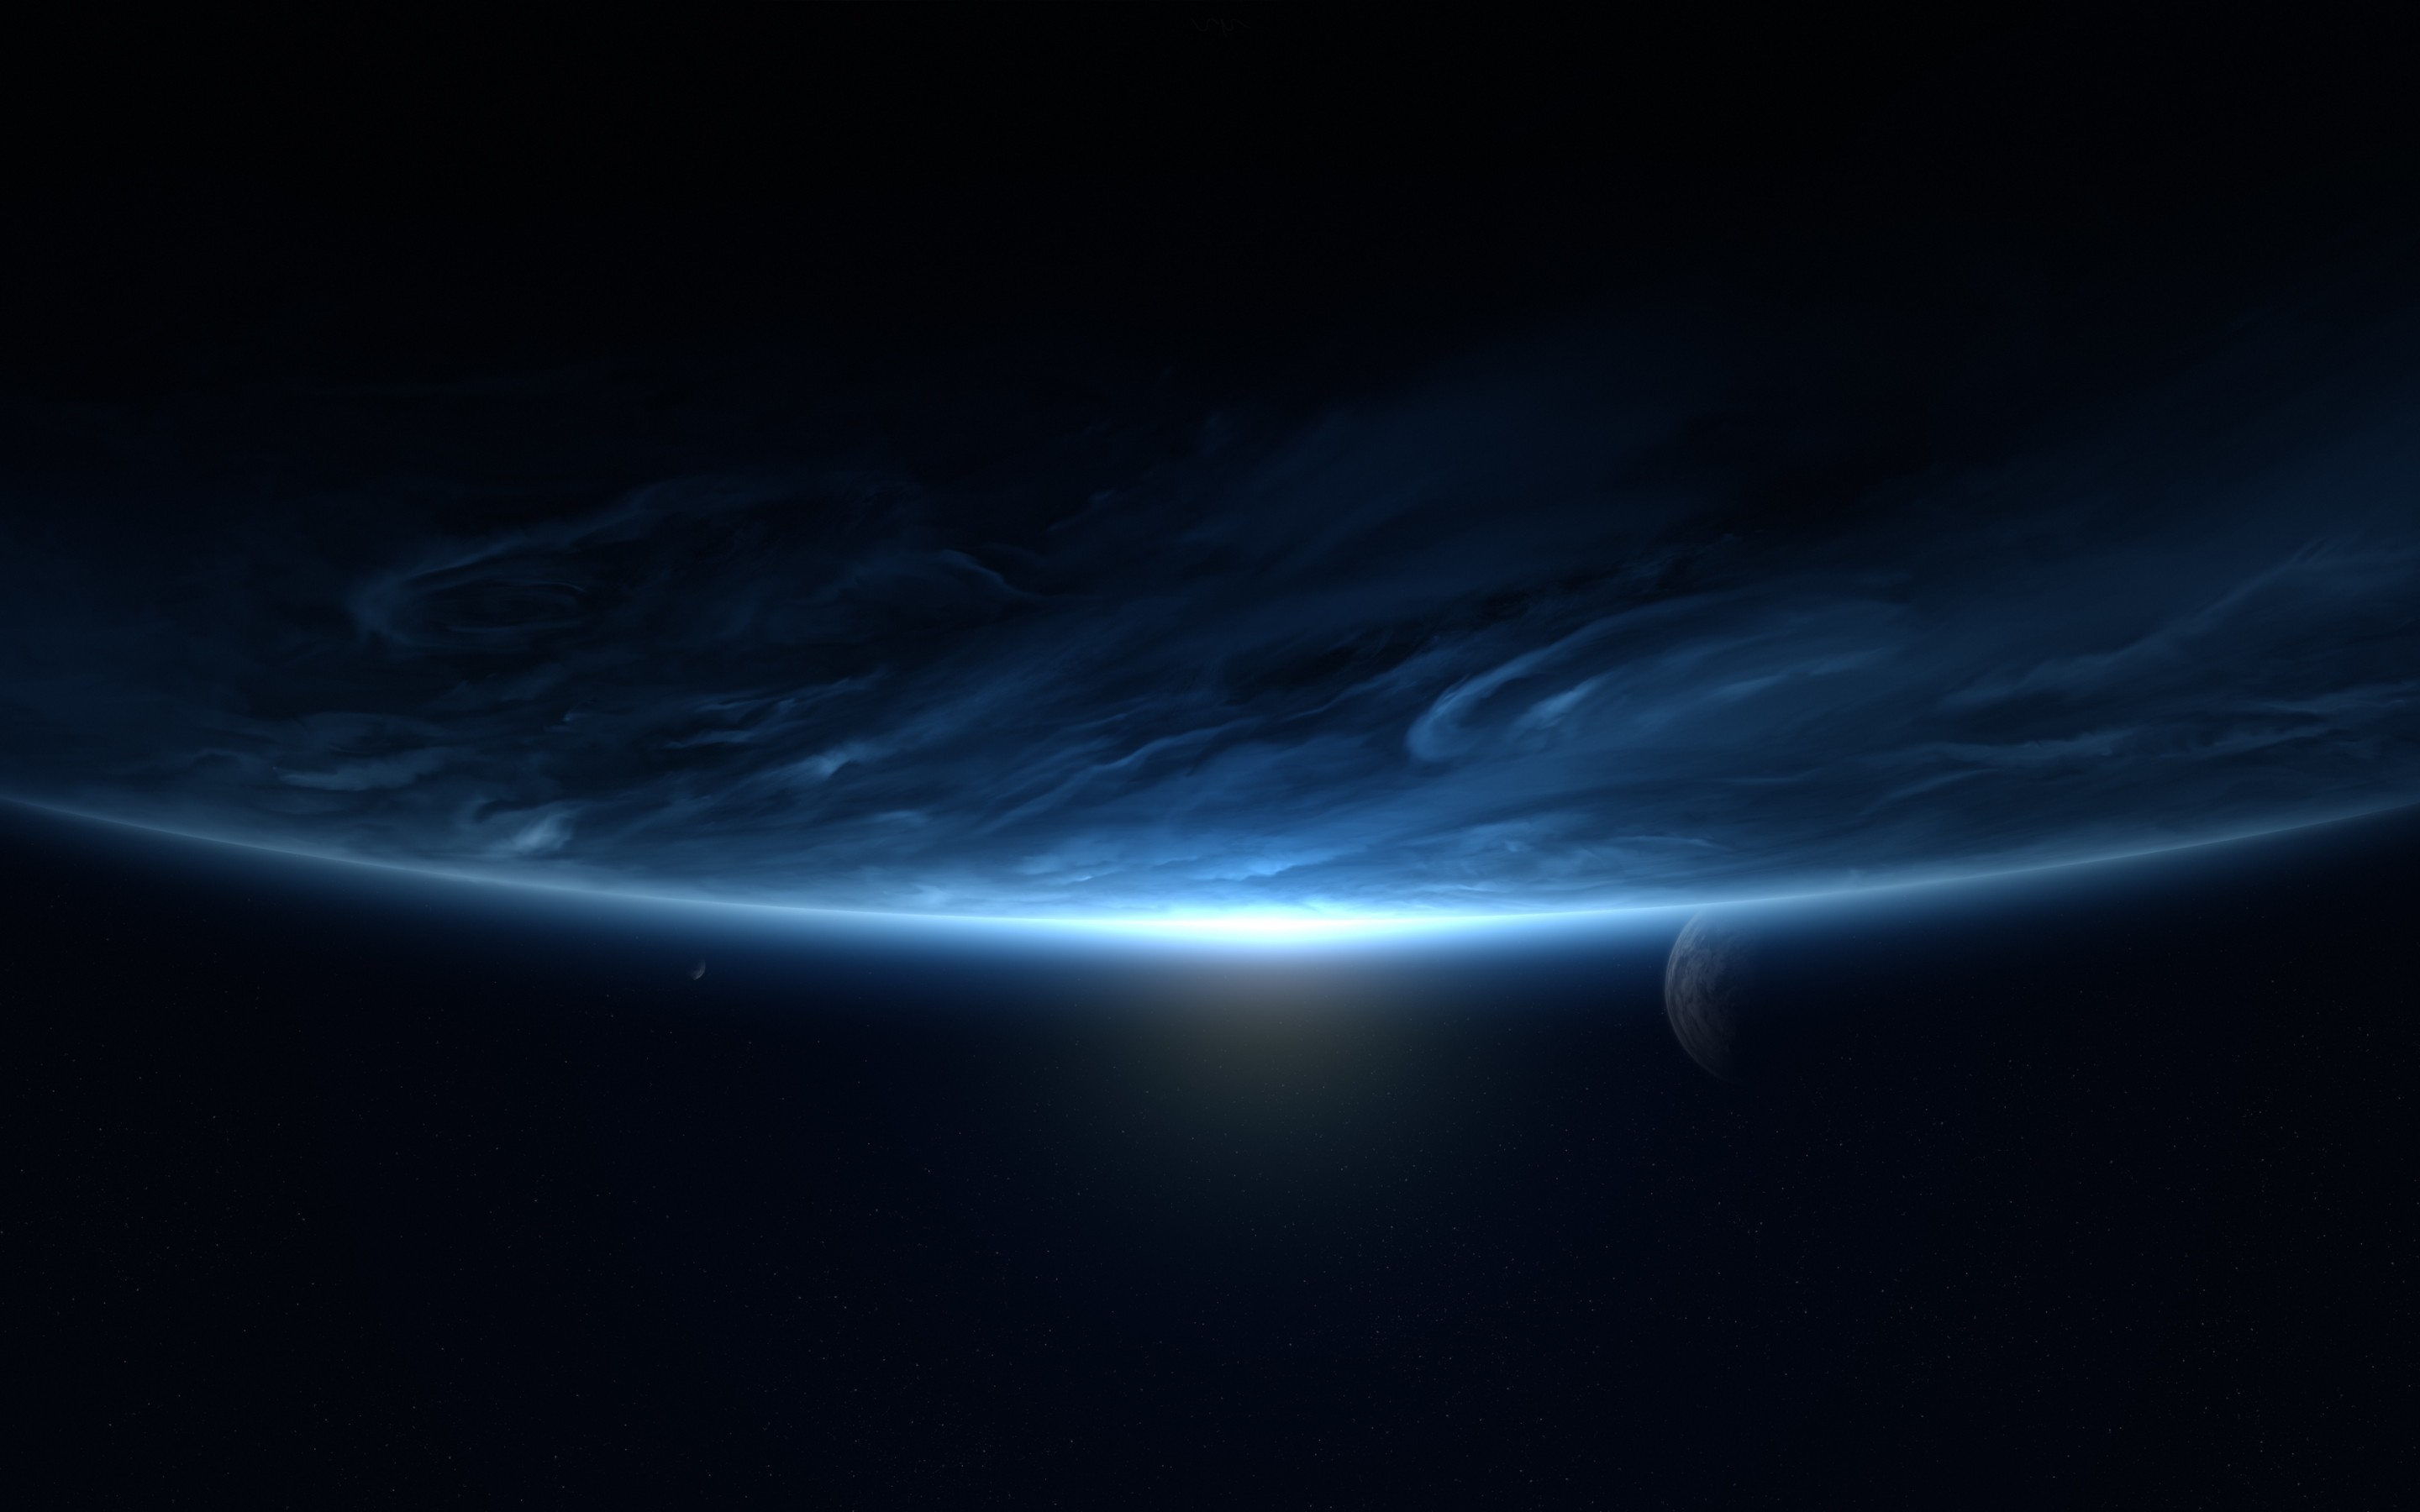 Light Under the Planet for 2880 x 1800 Retina Display resolution